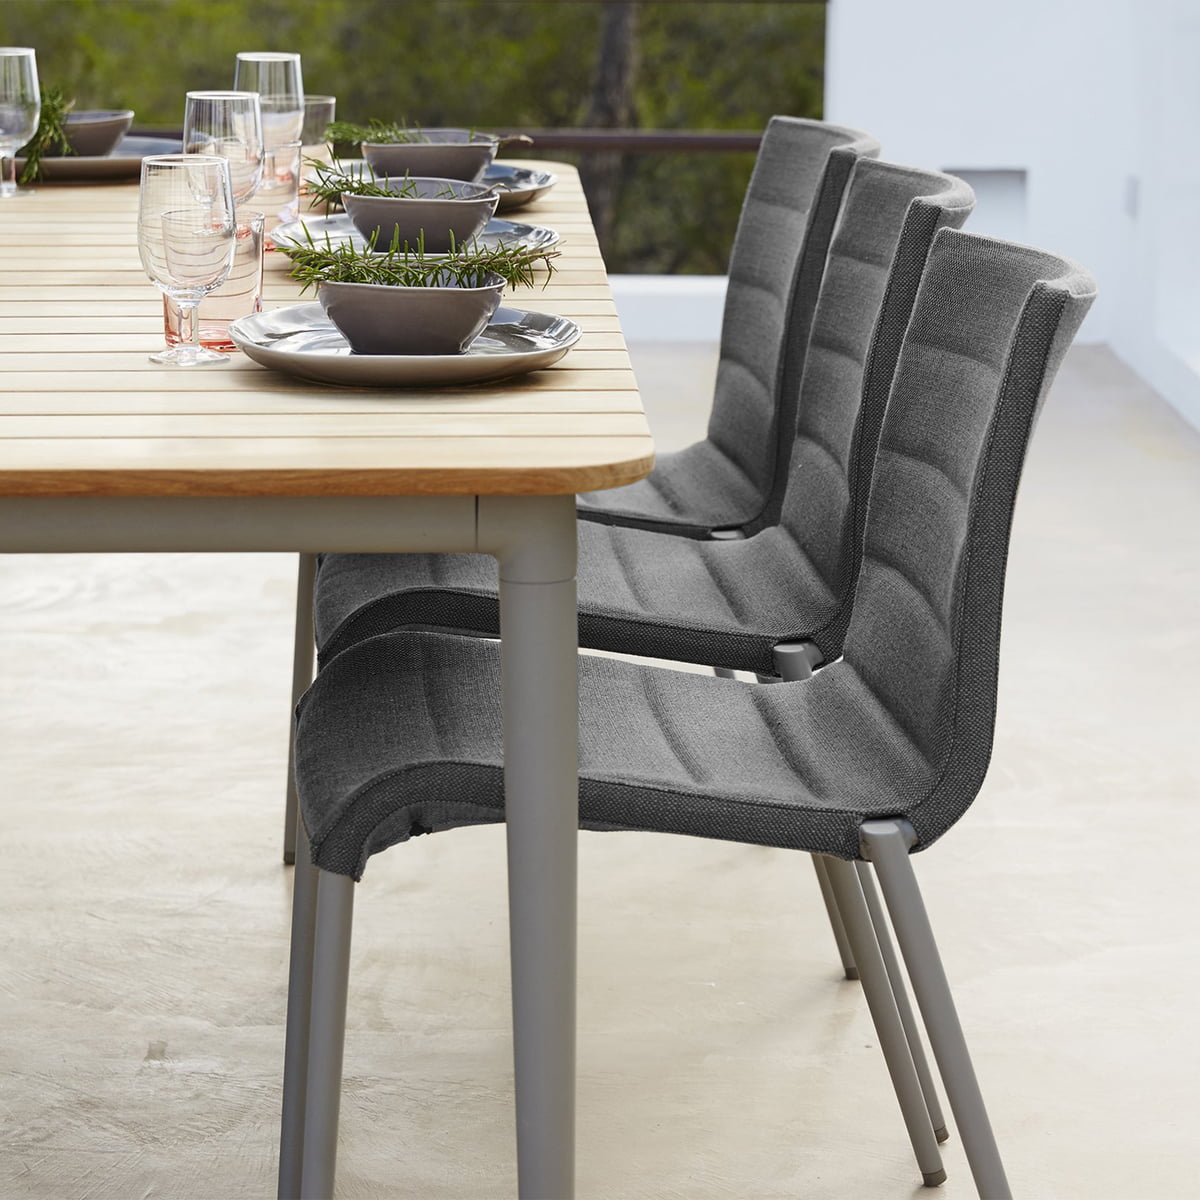 Core - Cane-line Outdoor Connox | chair